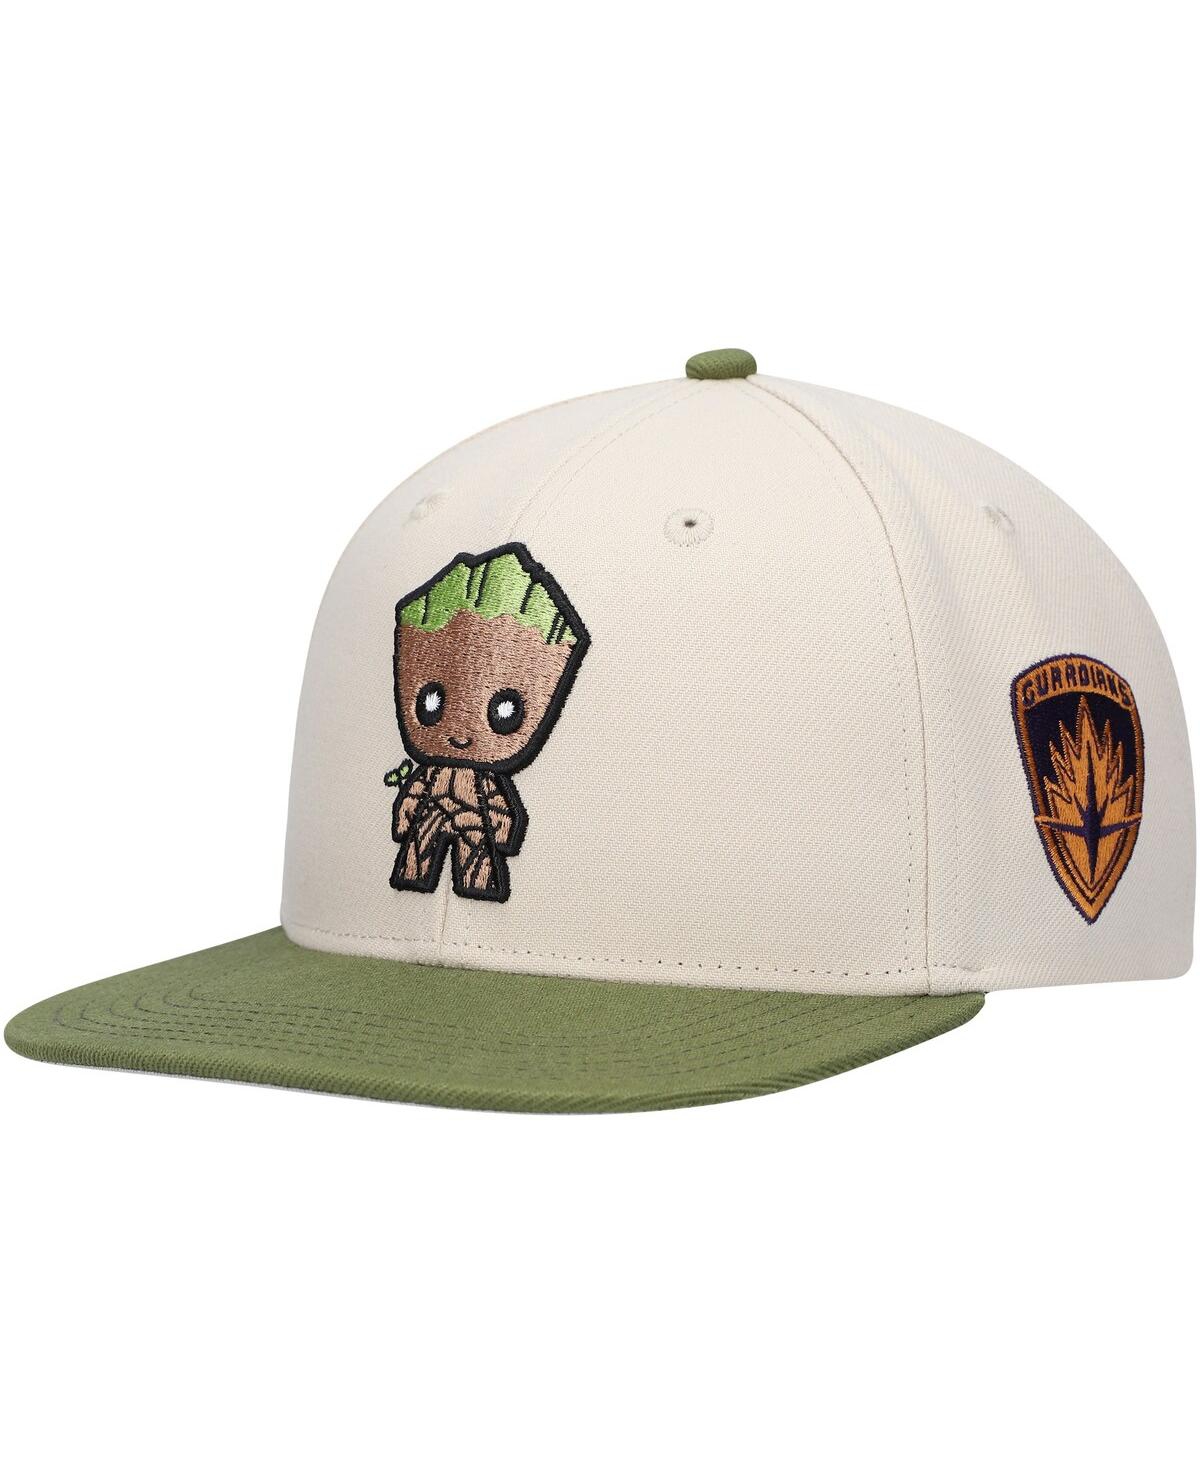 Youth Cream Guardians of the Galaxy Groot Character Snapback Hat - Cream